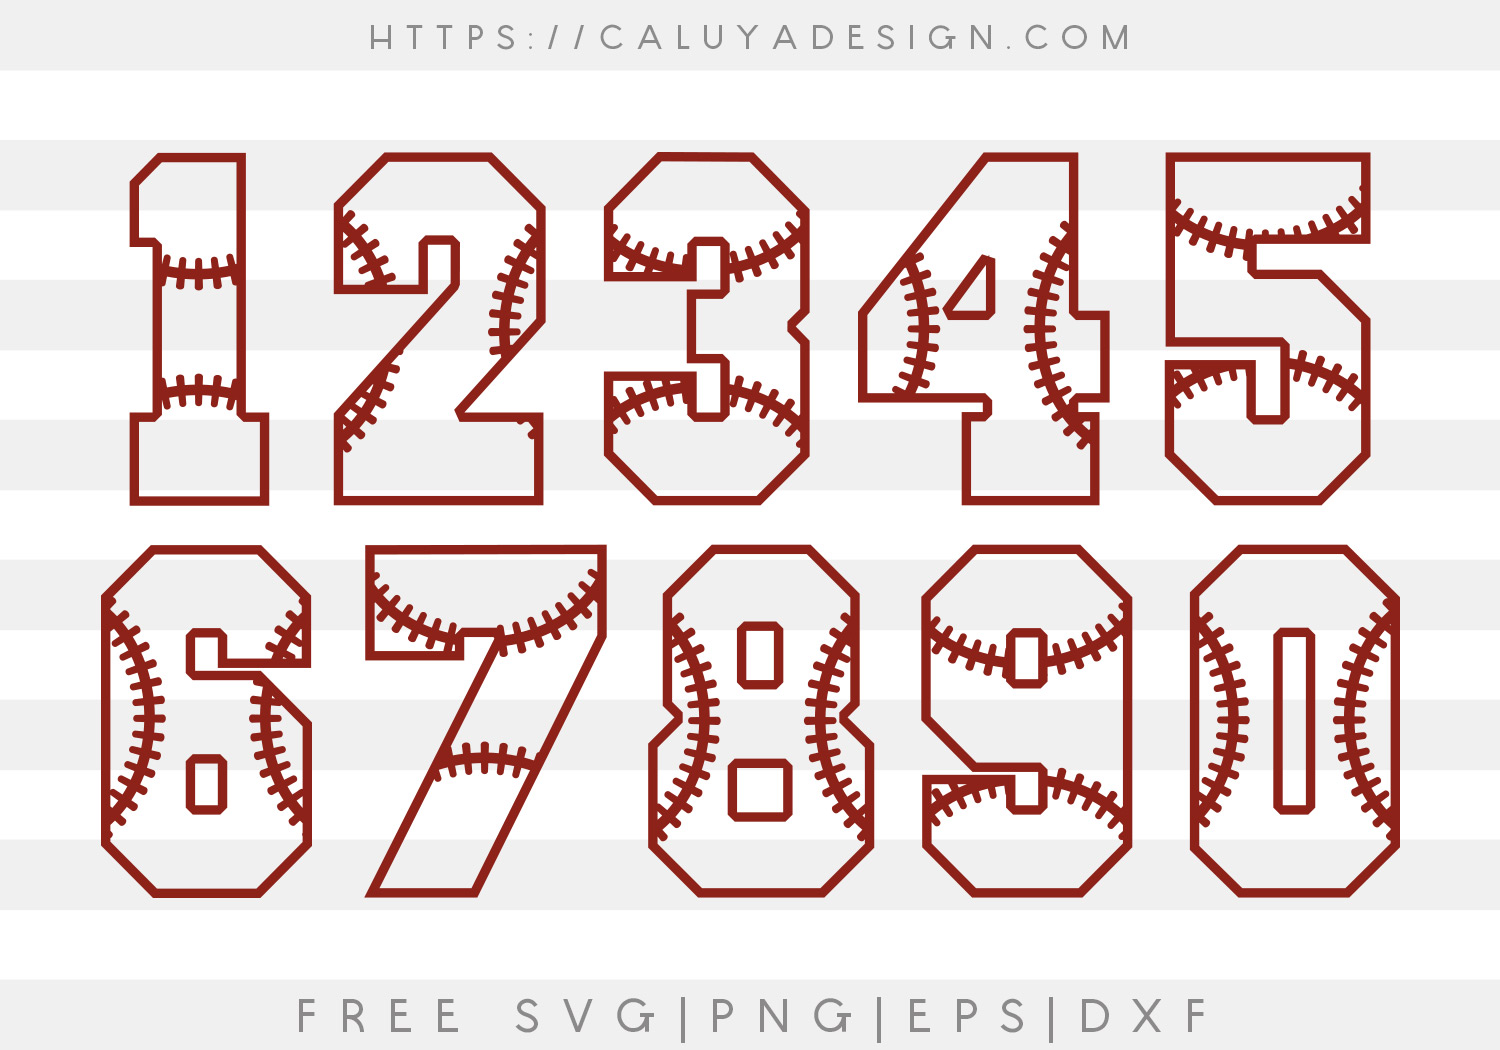 Download Free Svg Archives Page 3 Of 7 Caluya Design